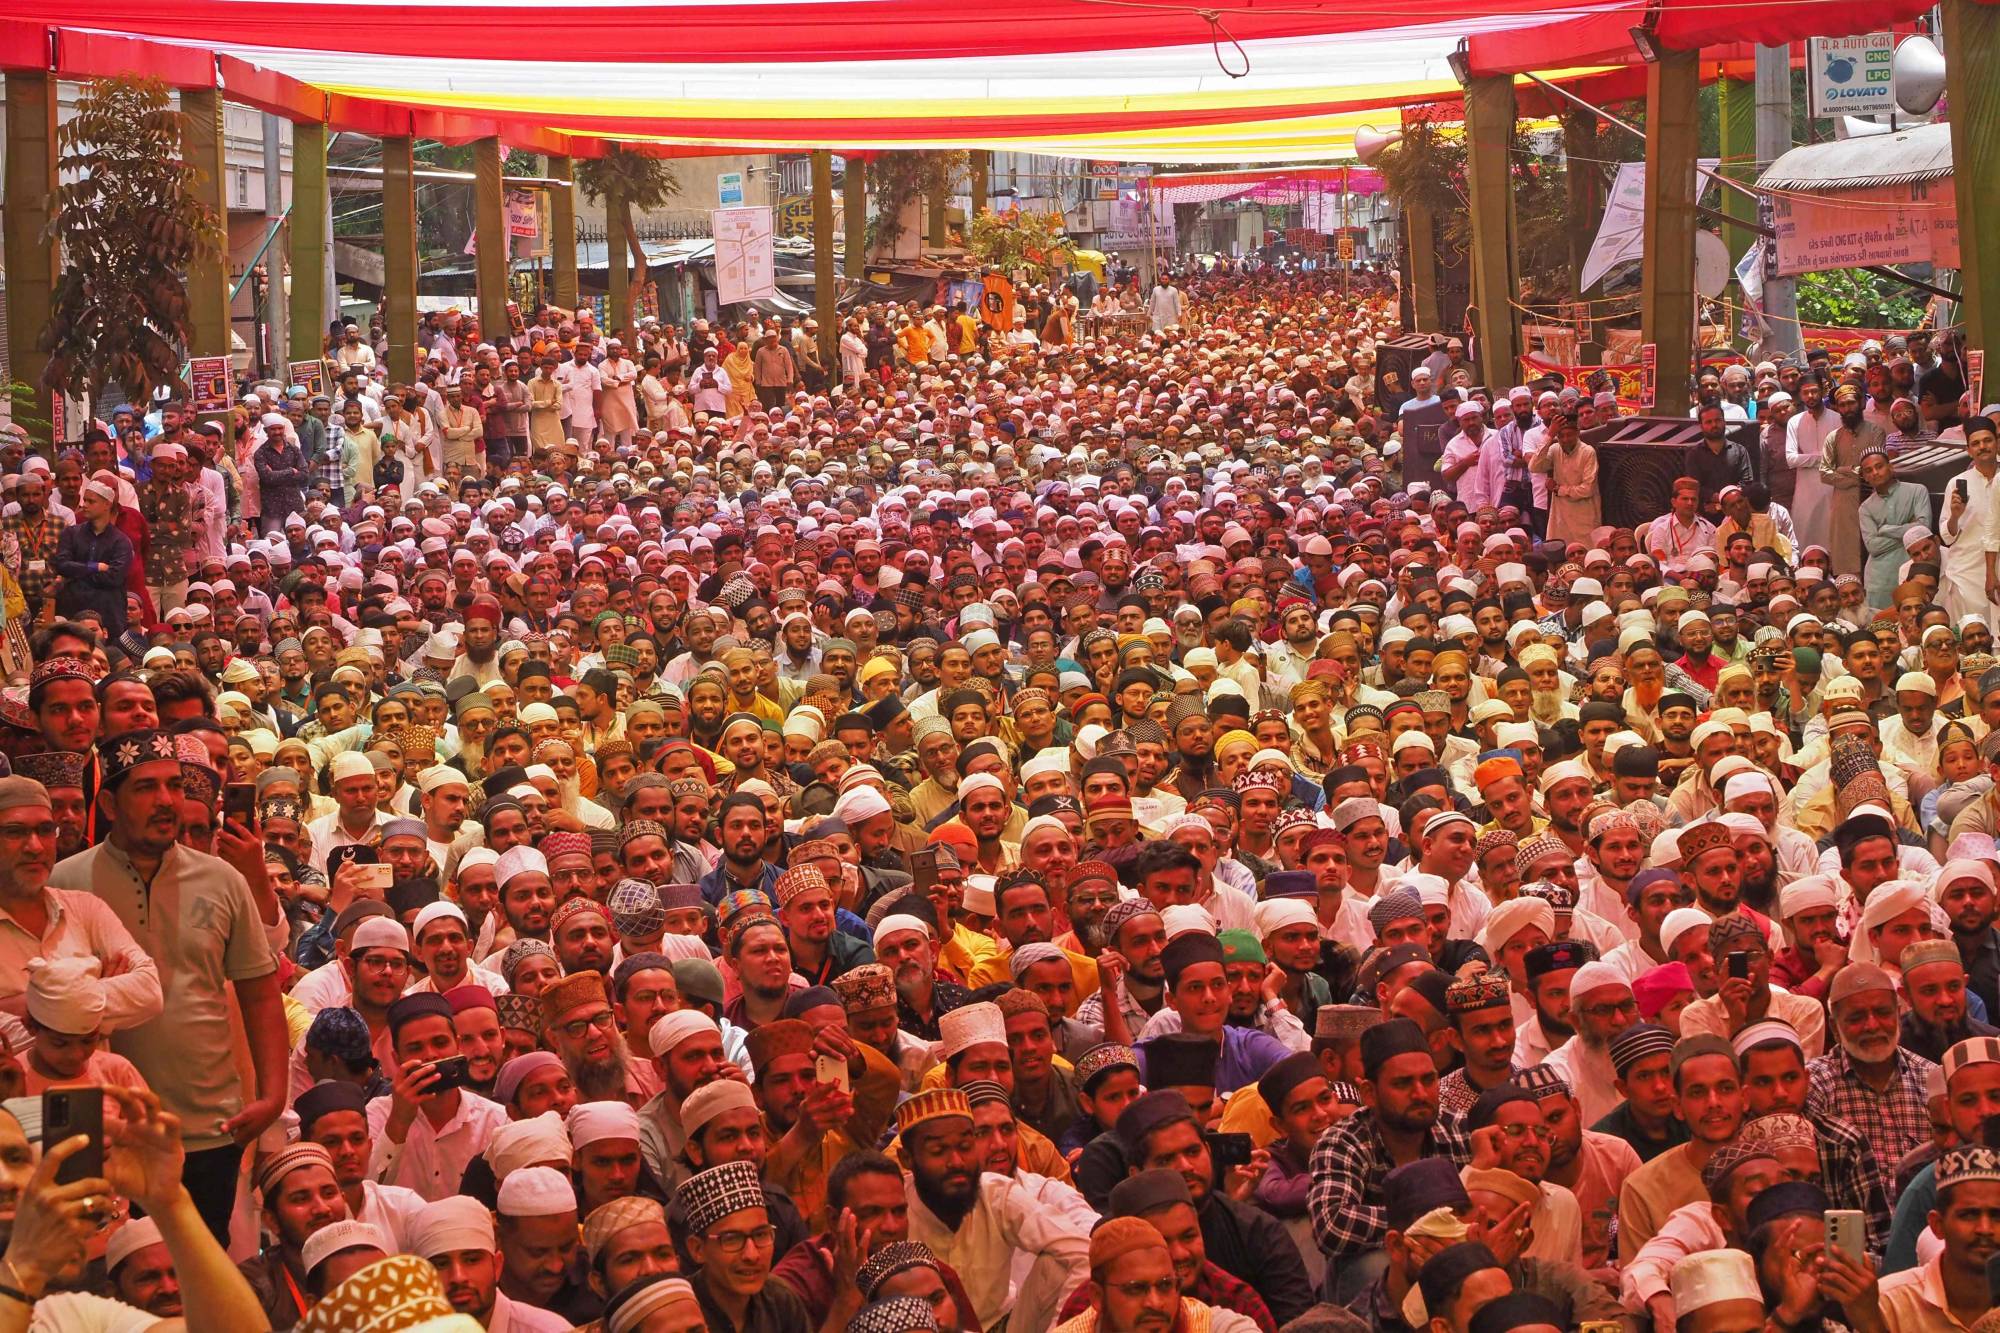 Muslims gather during a congregation in Ahmedabad on Sunday. Social media influencers from India's majority faith have cultivated large audiences by spreading false demographic data, to claim the country is being transformed into an Islamic state. | AFP-JIJI